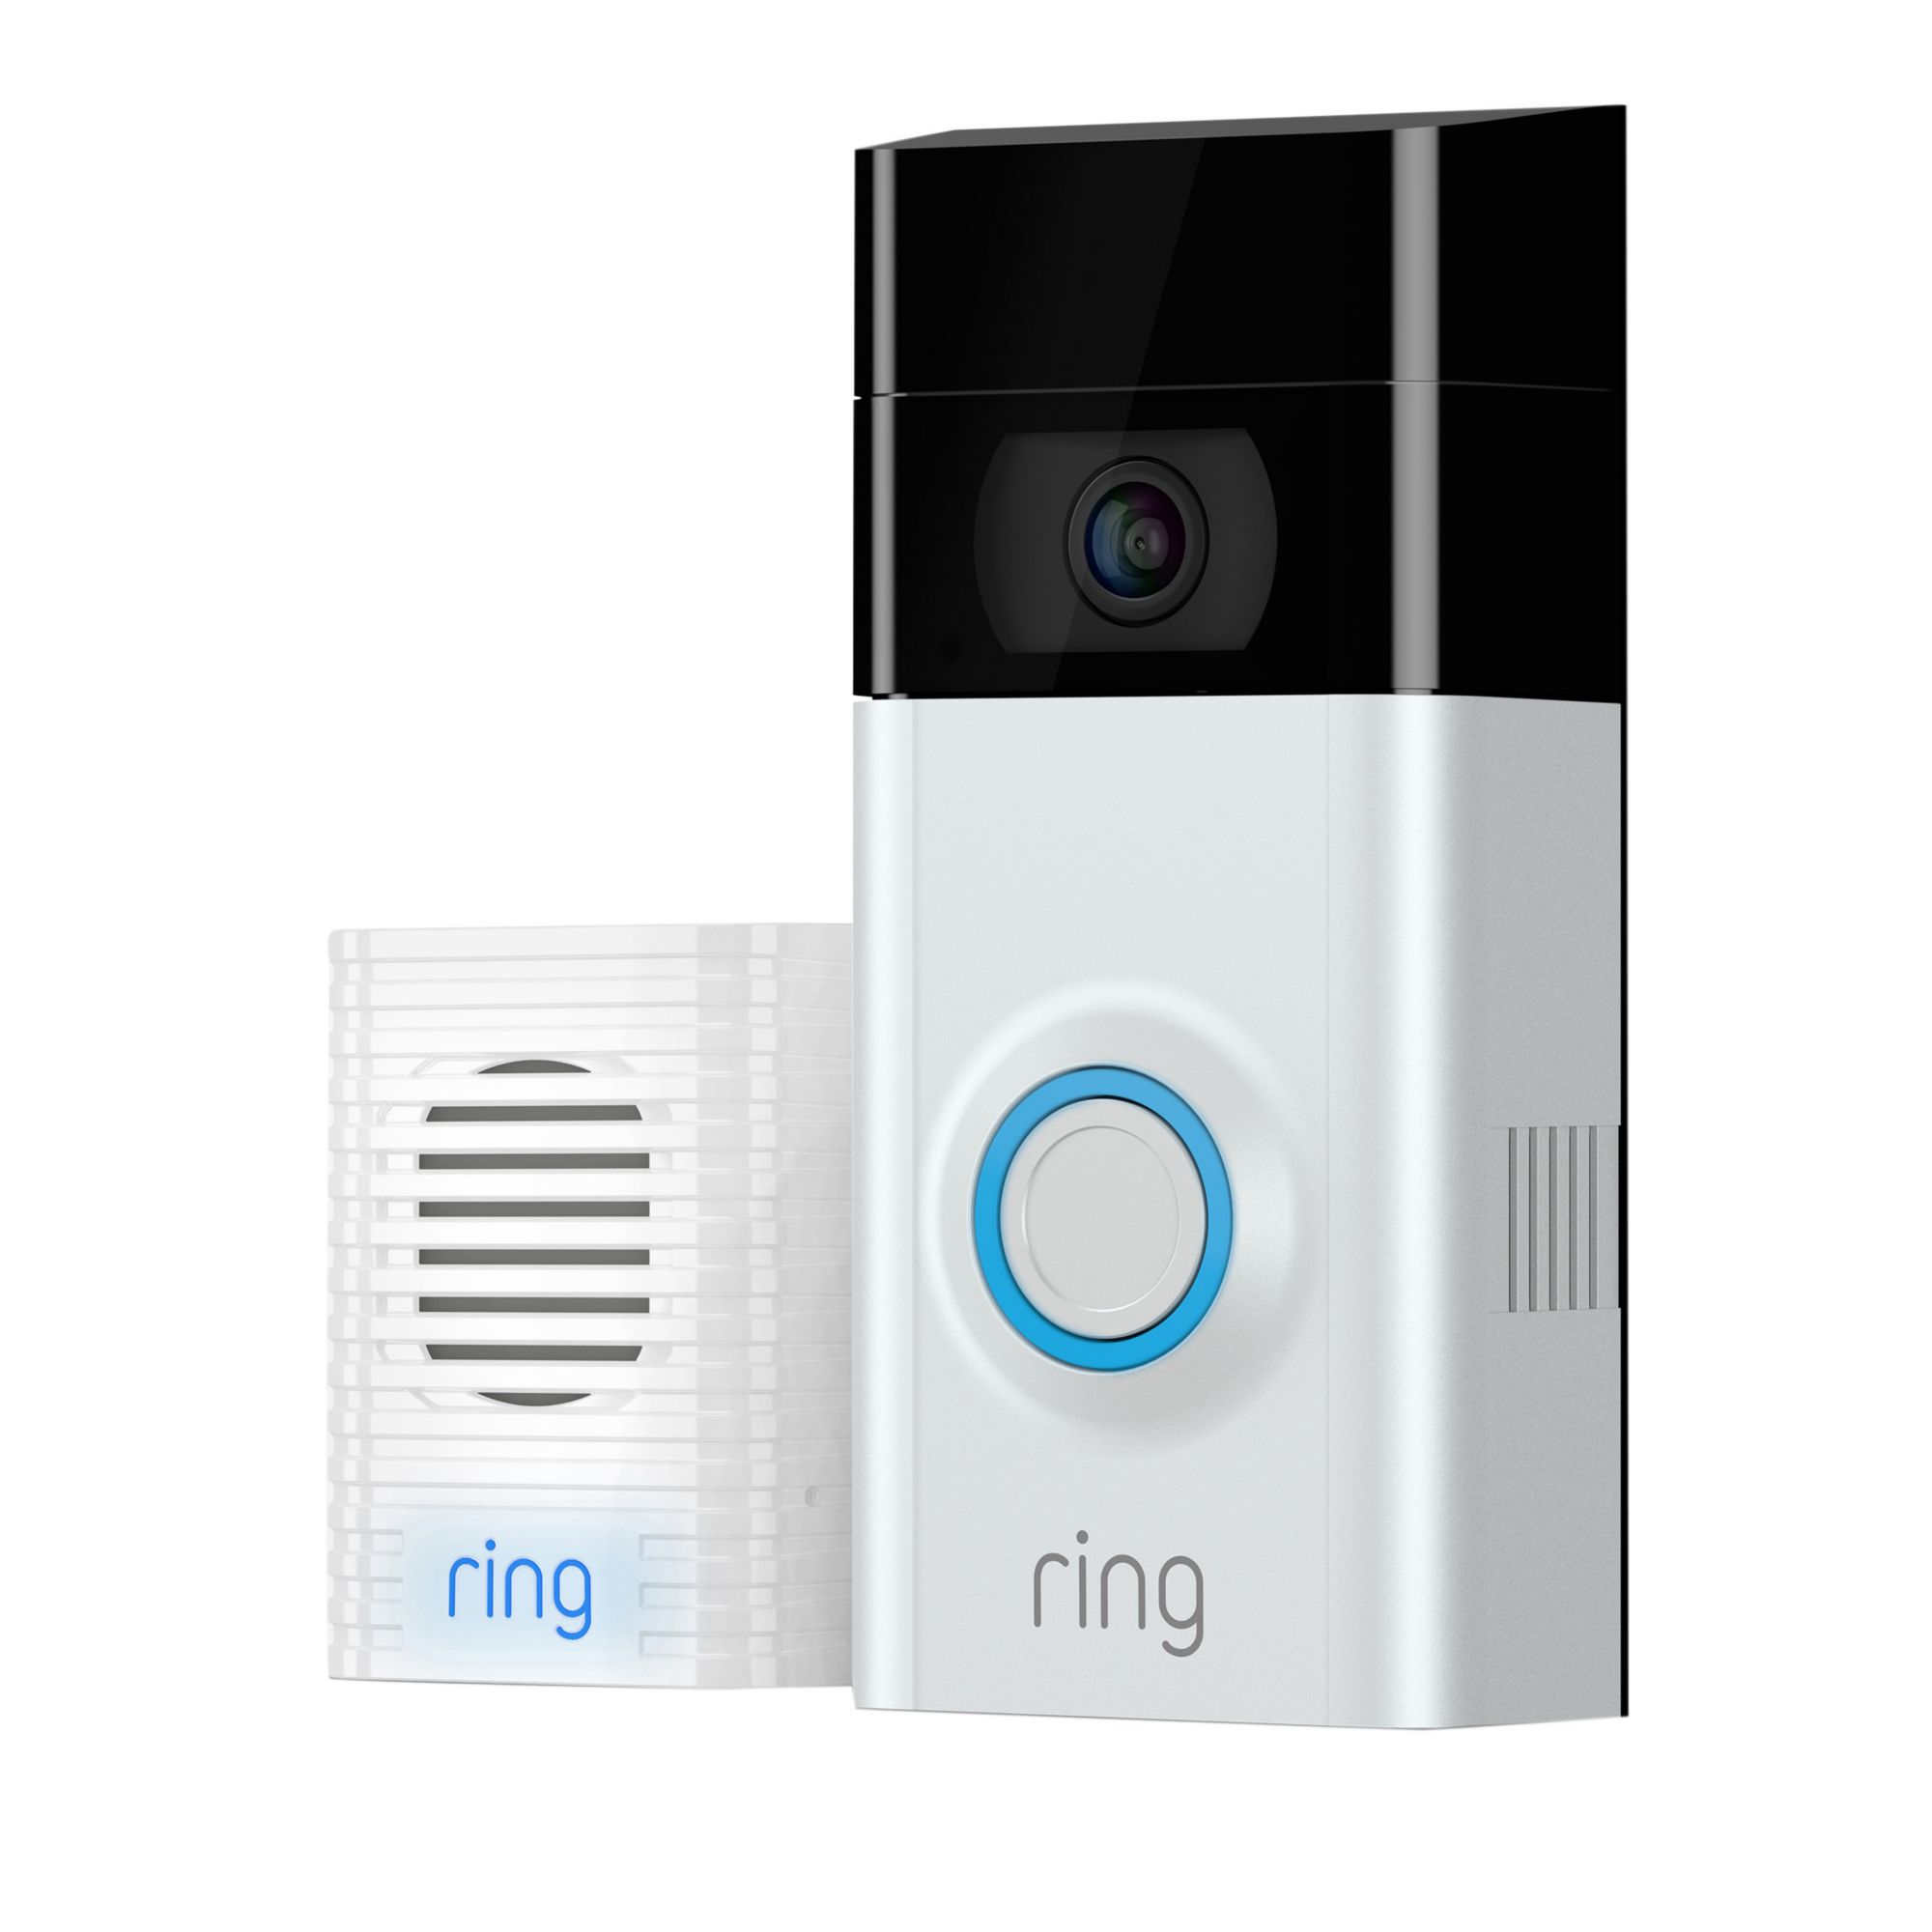 the ring doorbell with chime